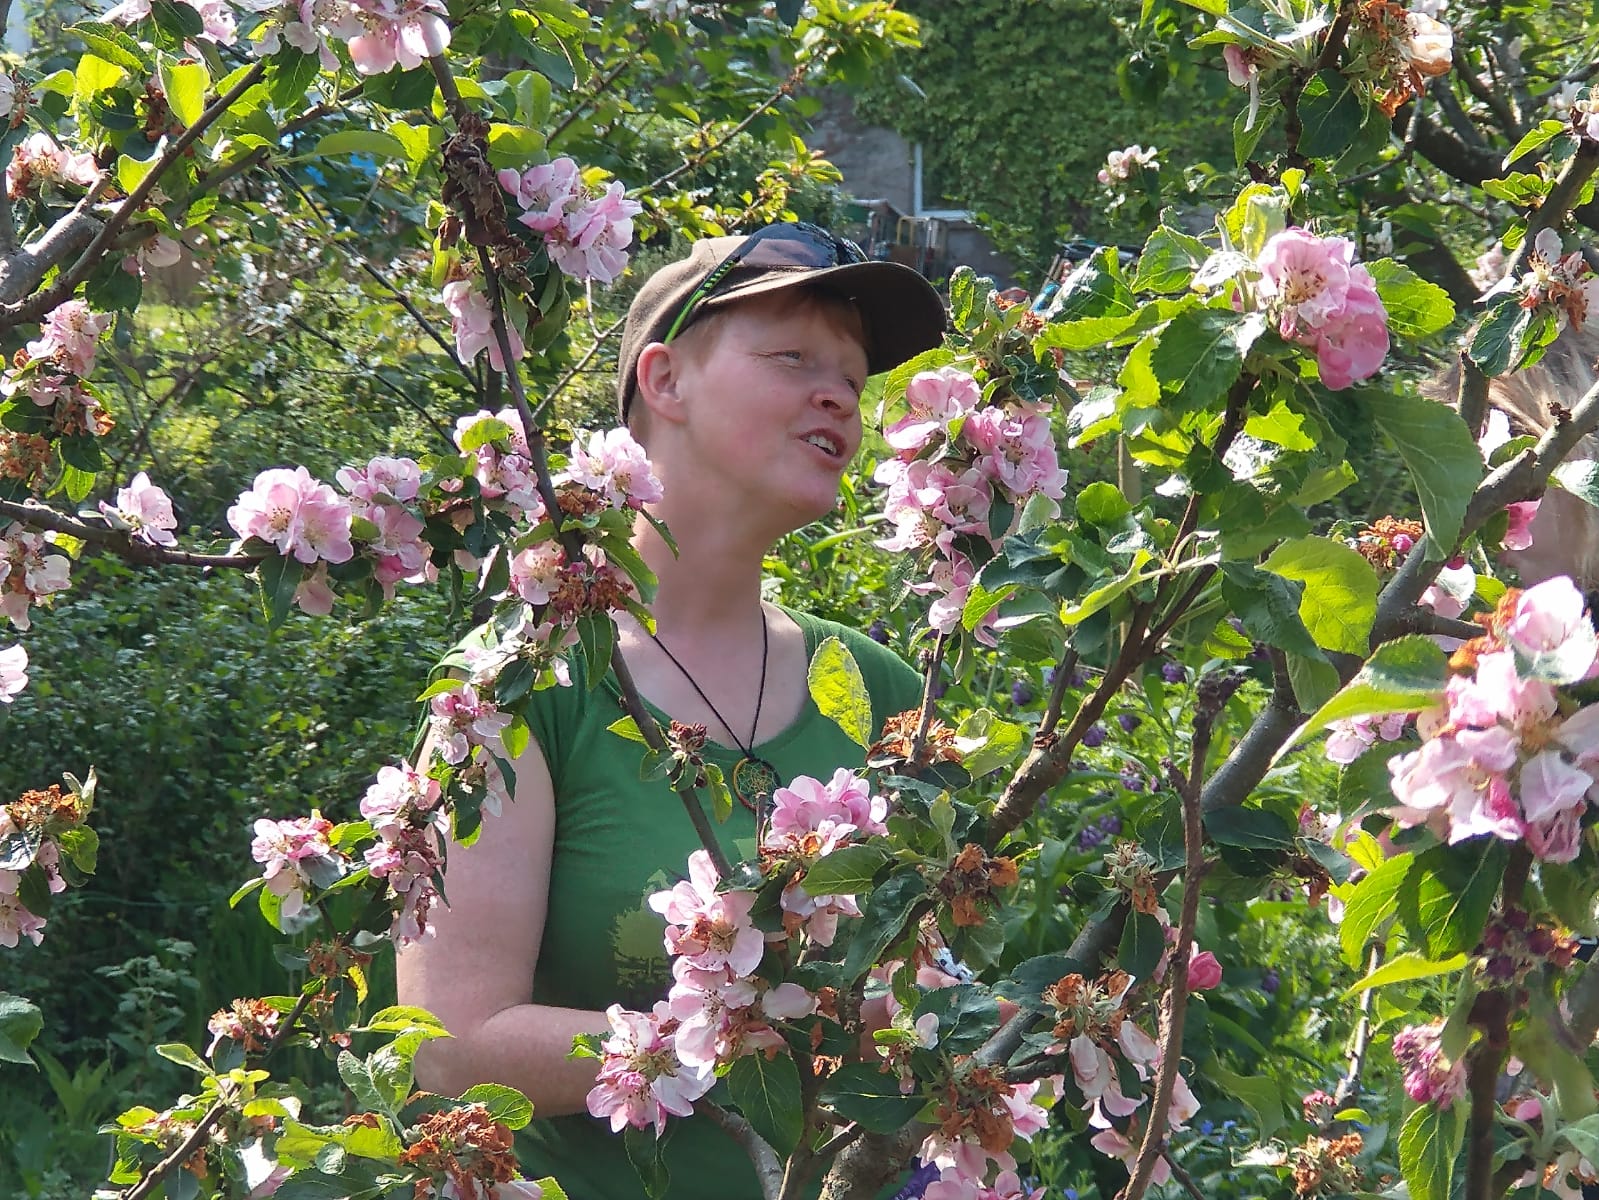 Lusi in the apple blossom